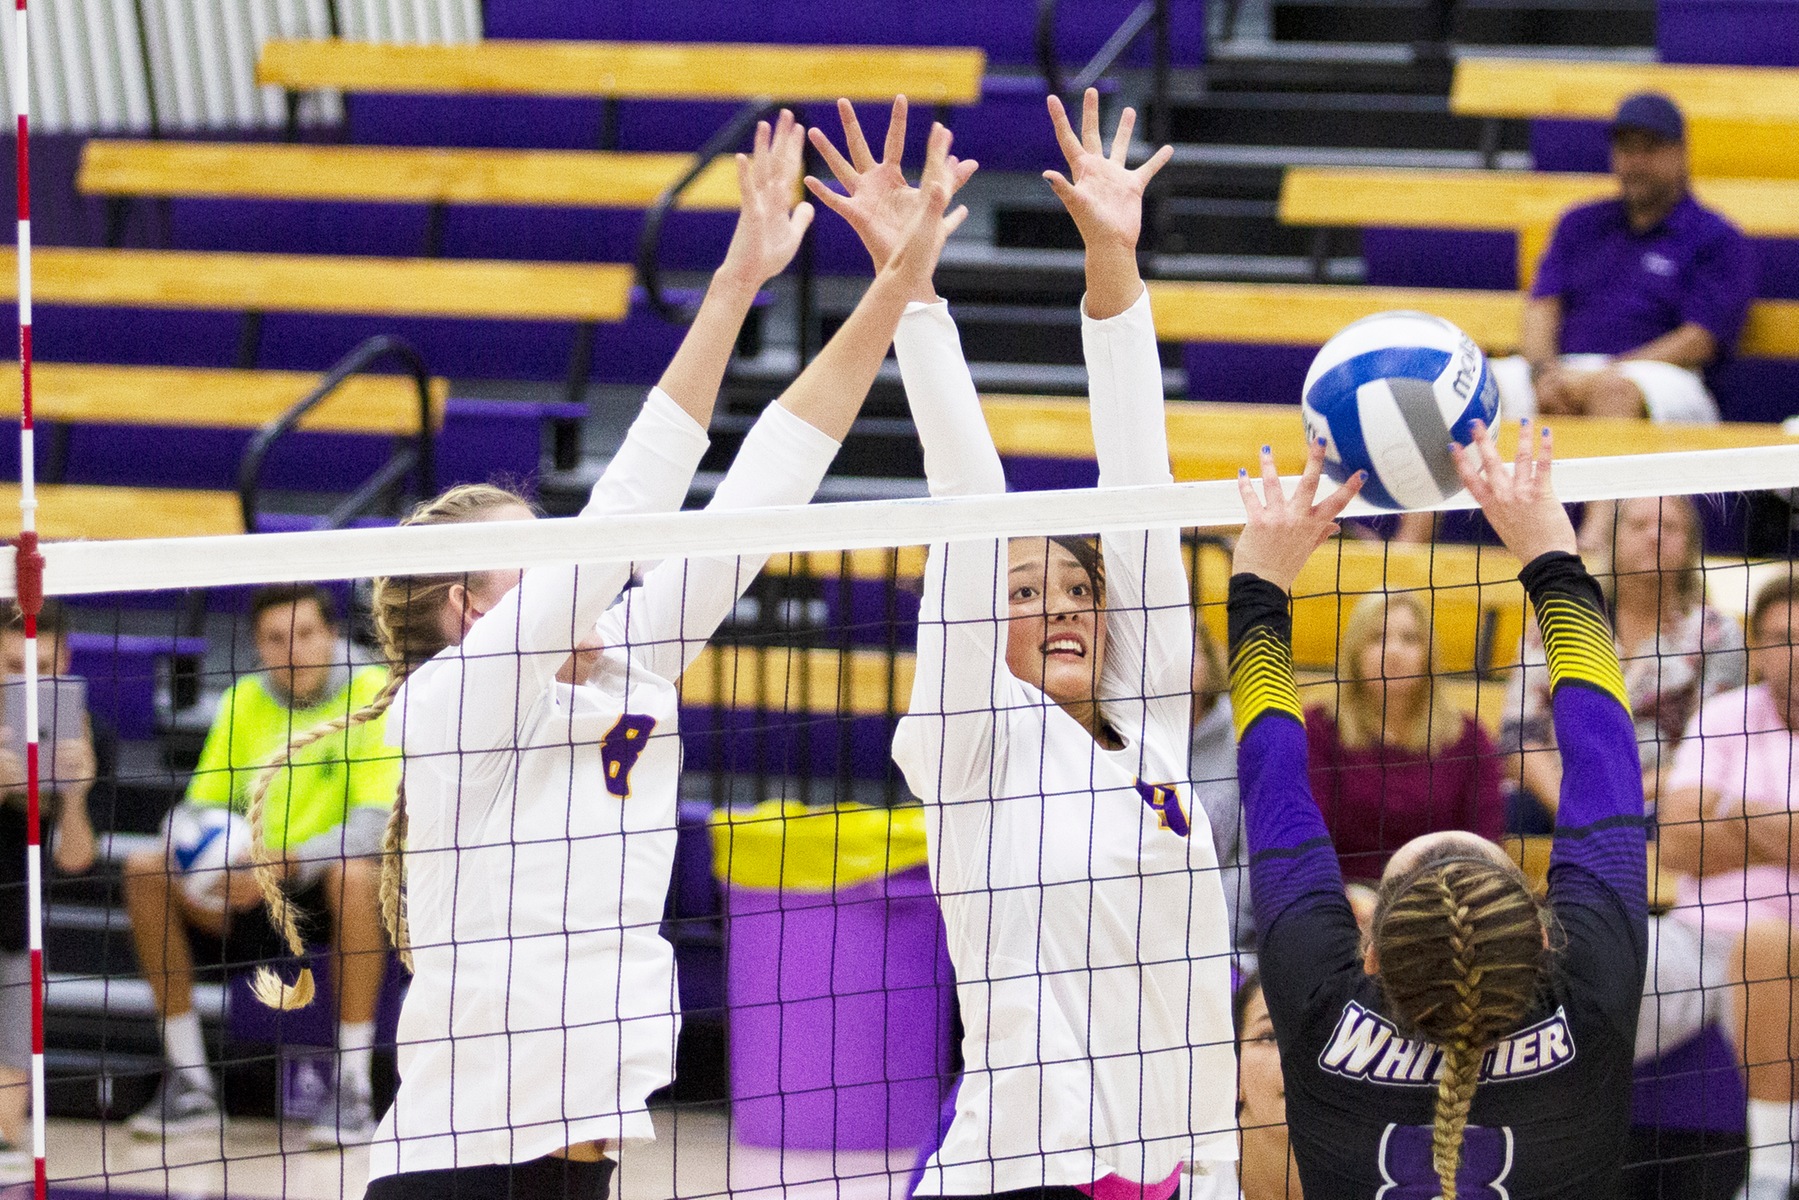 Regals Sweep Beavers; Given, Haddad Lead the Way With 8 Kills Each